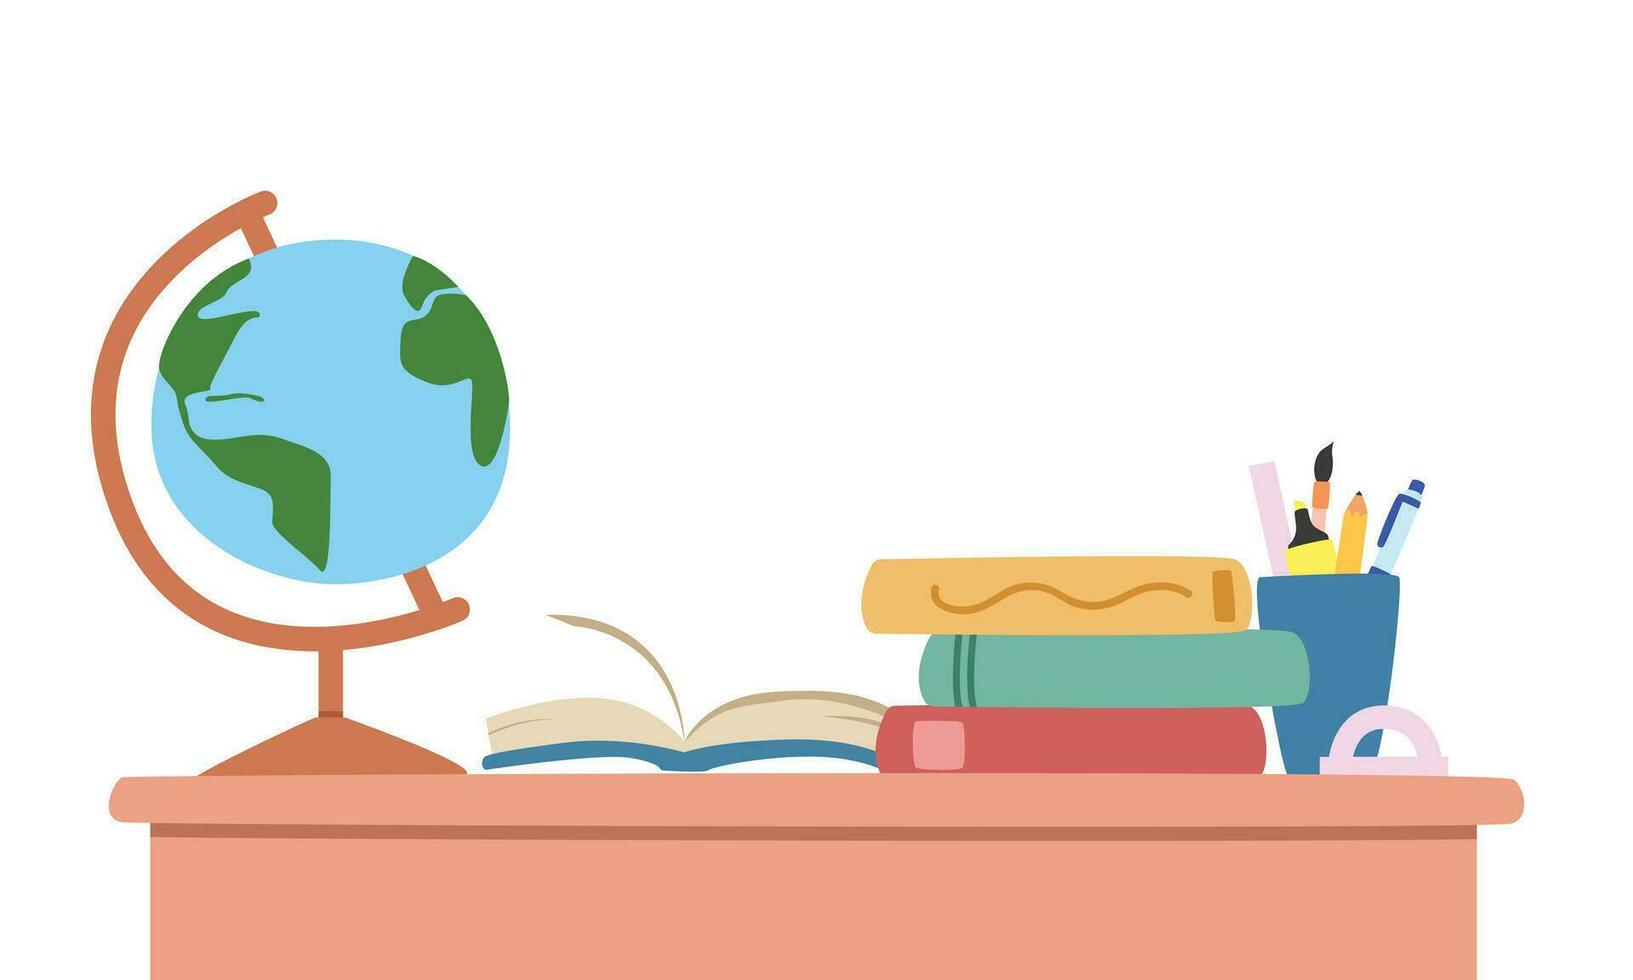 Student desk with Earth globe, open book, pen holder, stack of books clipart cartoon style vector illustration. Back to school, homework, study corner, classroom concept. Hand drawn style